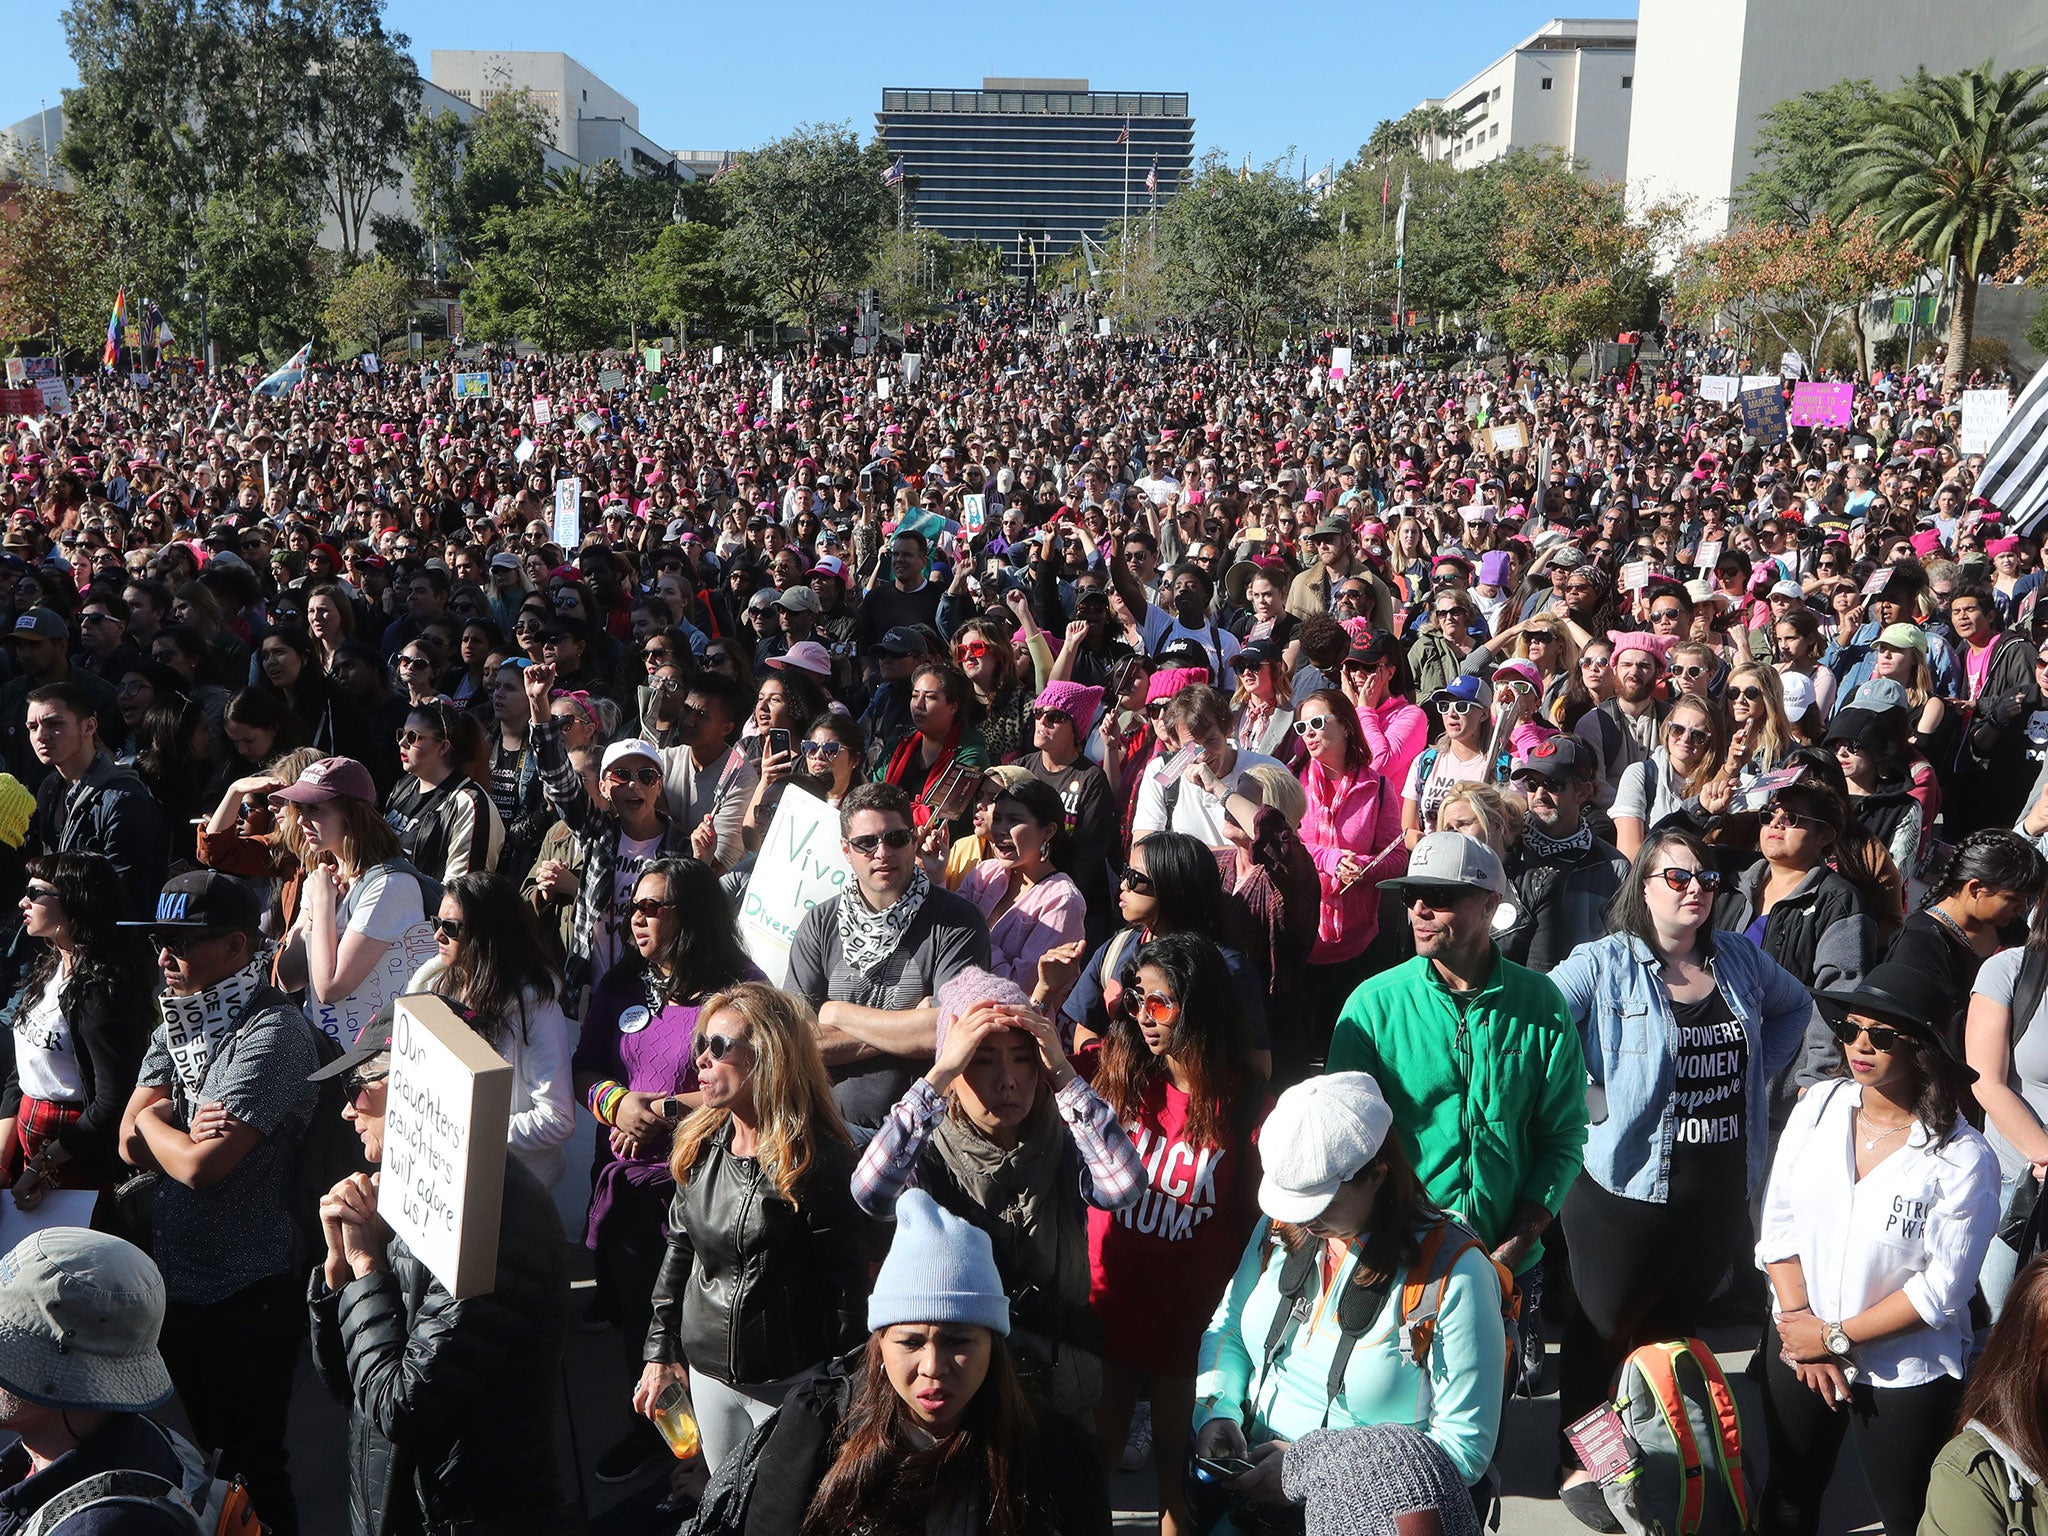 Thousands of demonstrators listen to speakers at the Women's March in Los Angeles, California, on 20 January 2018.